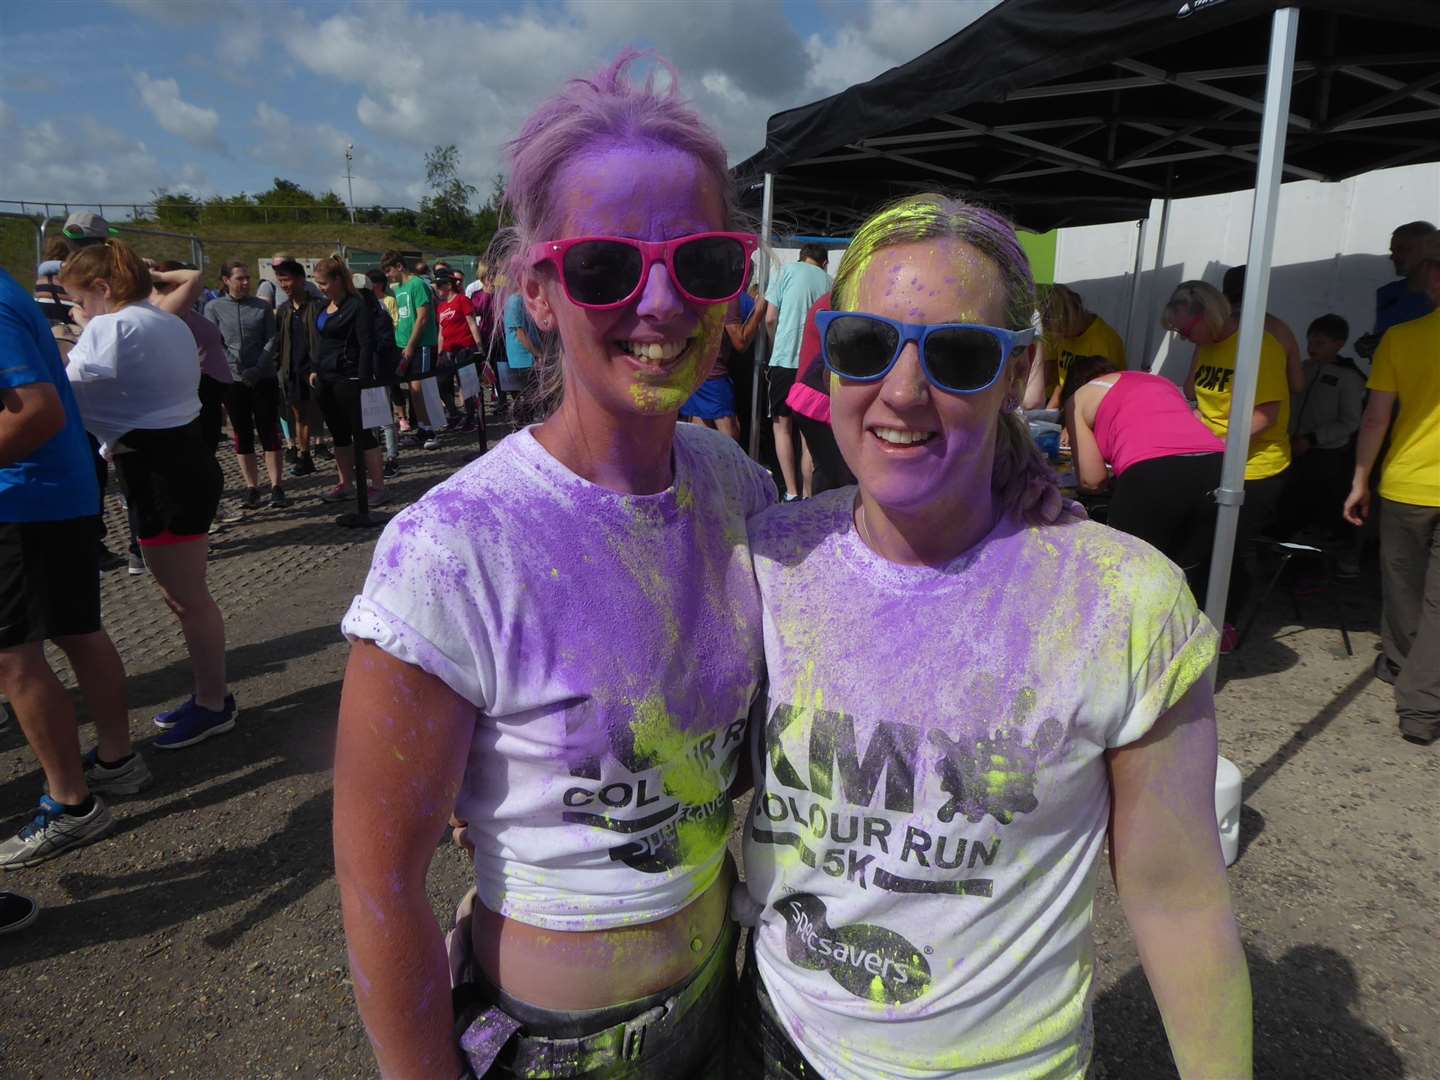 Leanne Ford of Whitstable and Louise Angus of Herne Bay ran at the KM Colour Run for British Heart Foundation.